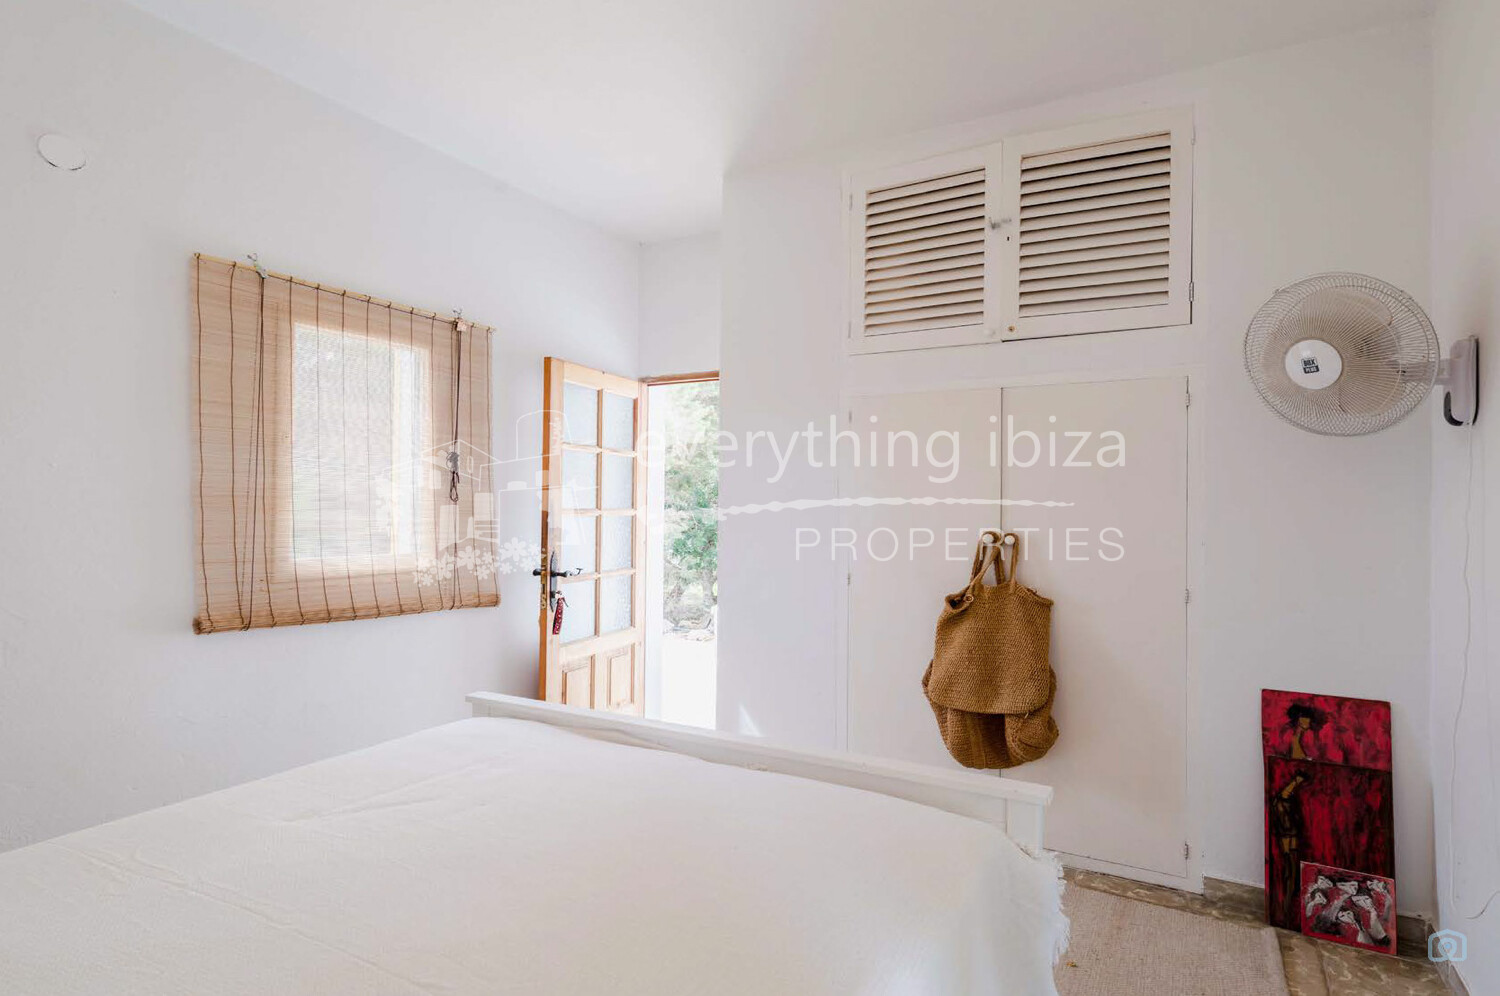 Charming Cosy Villa Recently Renovated in a Peaceful Location, ref. 1630, for sale in Ibiza by everything ibiza Properties